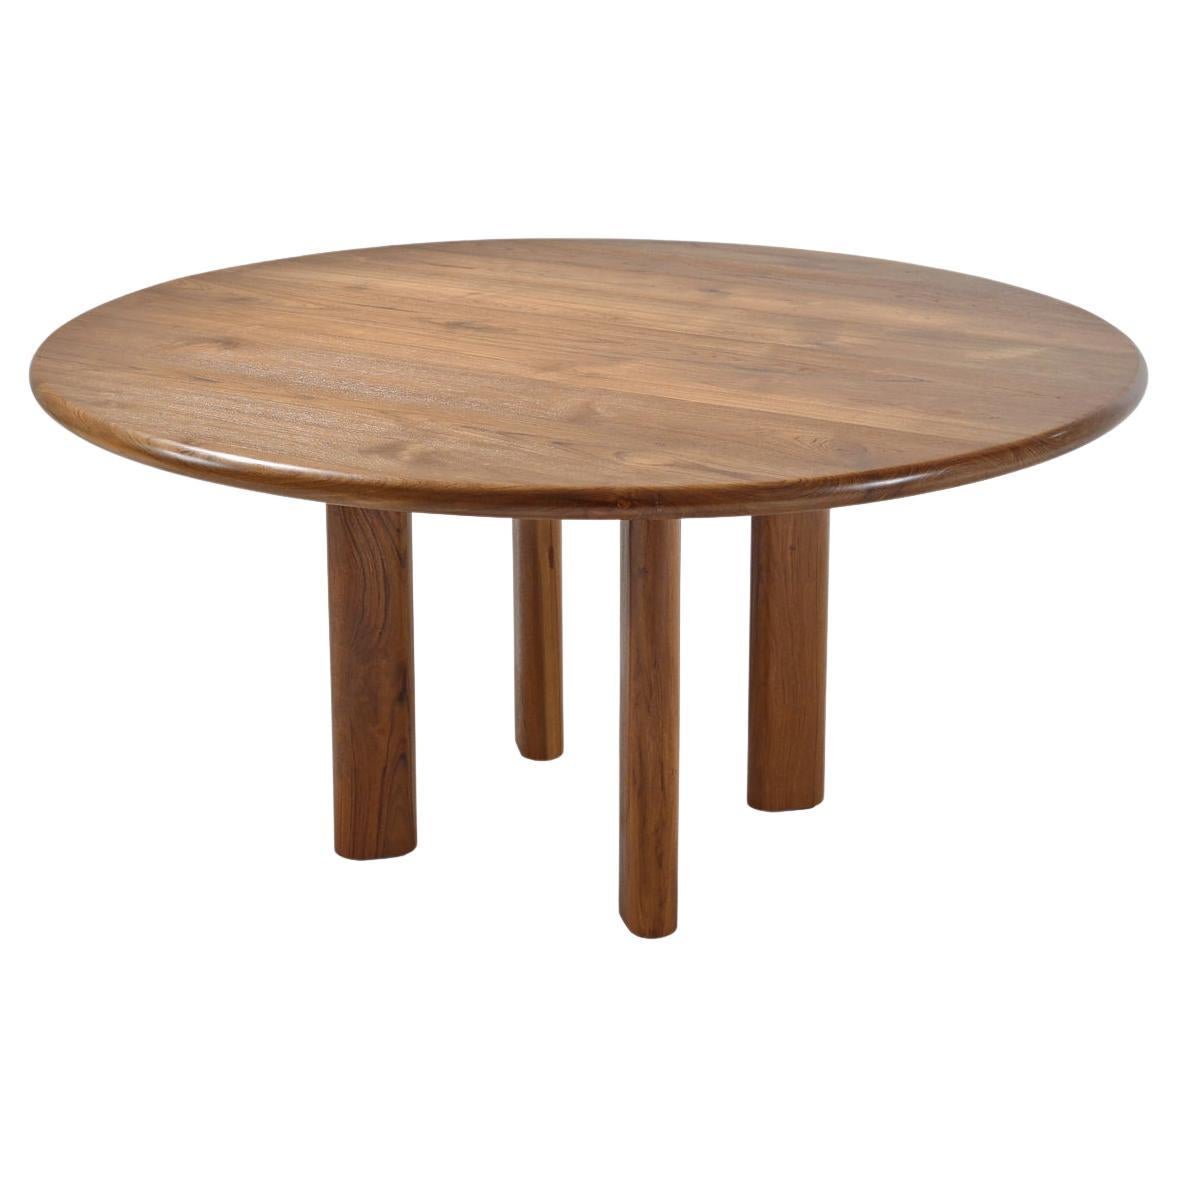 Bespoke Round Table with Wood Base, Reclaimed Teak Wood, by P. Tendercool For Sale